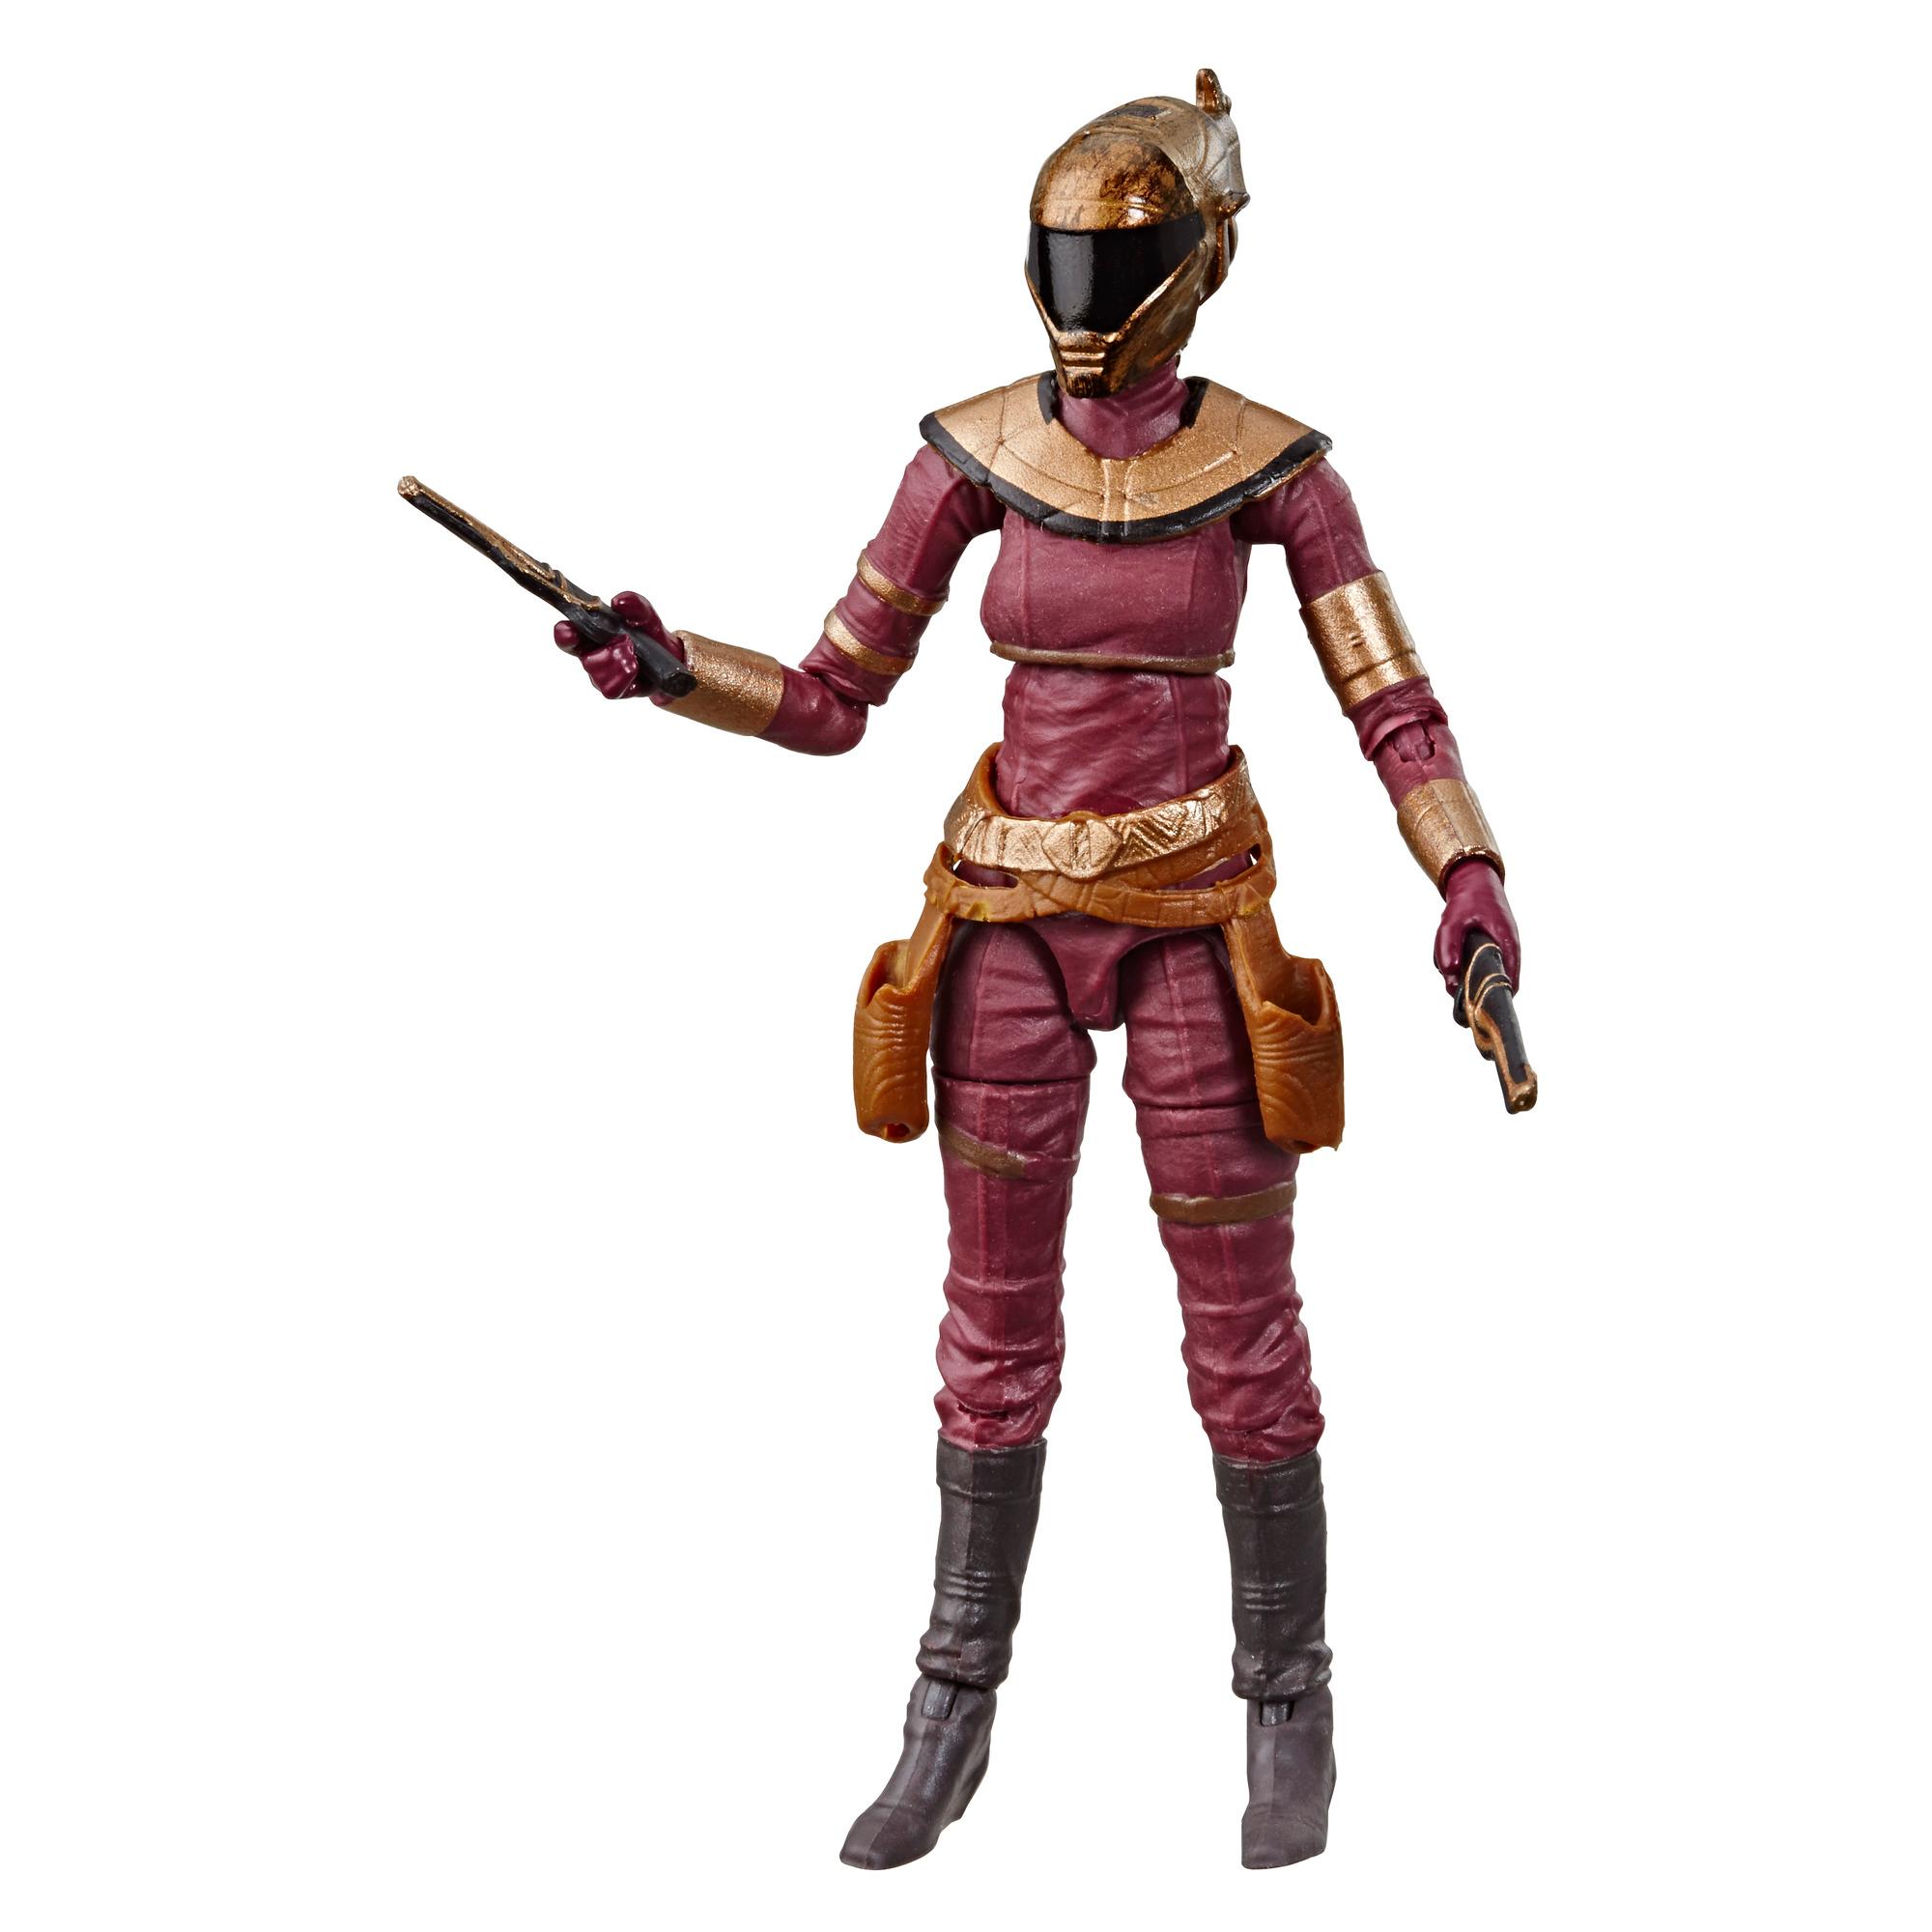 Star Wars The Vintage Collection Star Wars: The Rise of Skywalker Zorii Bliss Toy, 3.75-inch Scale Figure, Ages 4 and Up